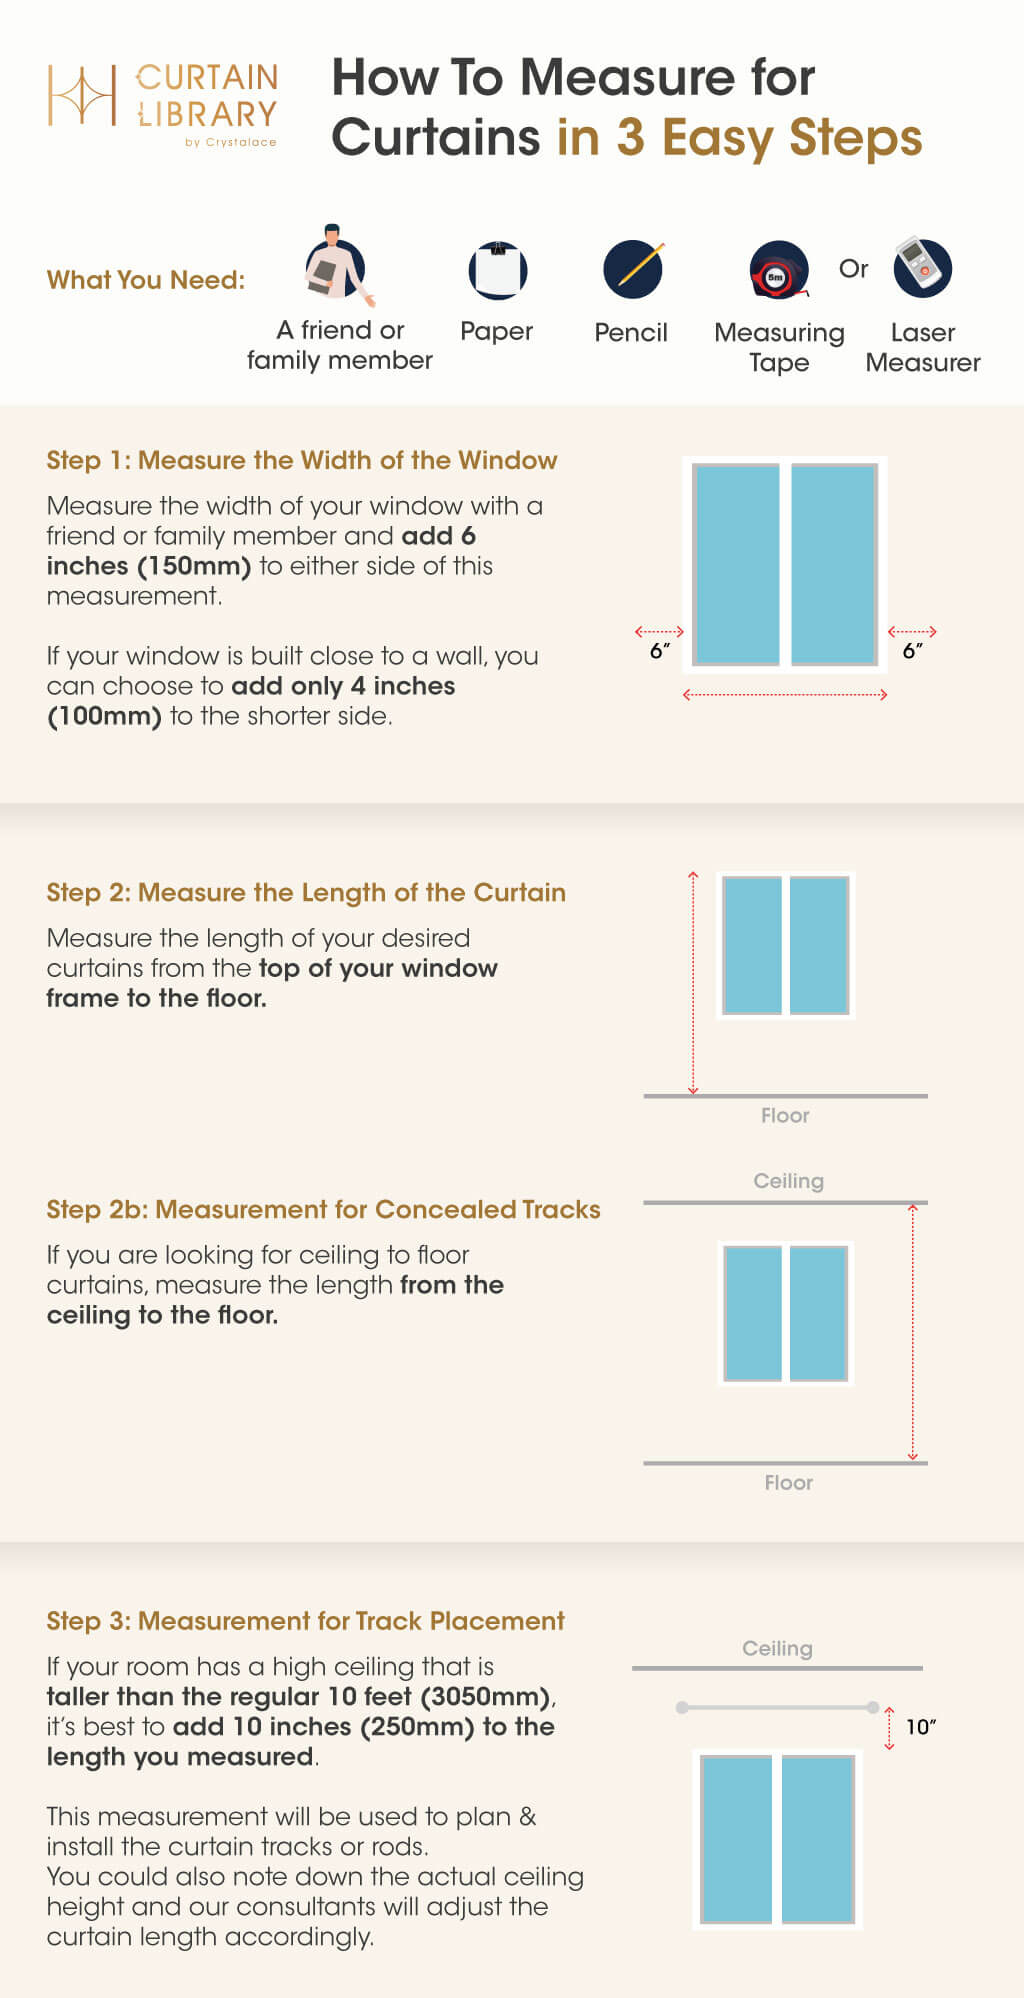 Curtain Library's Guide to Measuring Curtains In 3 Easy Steps